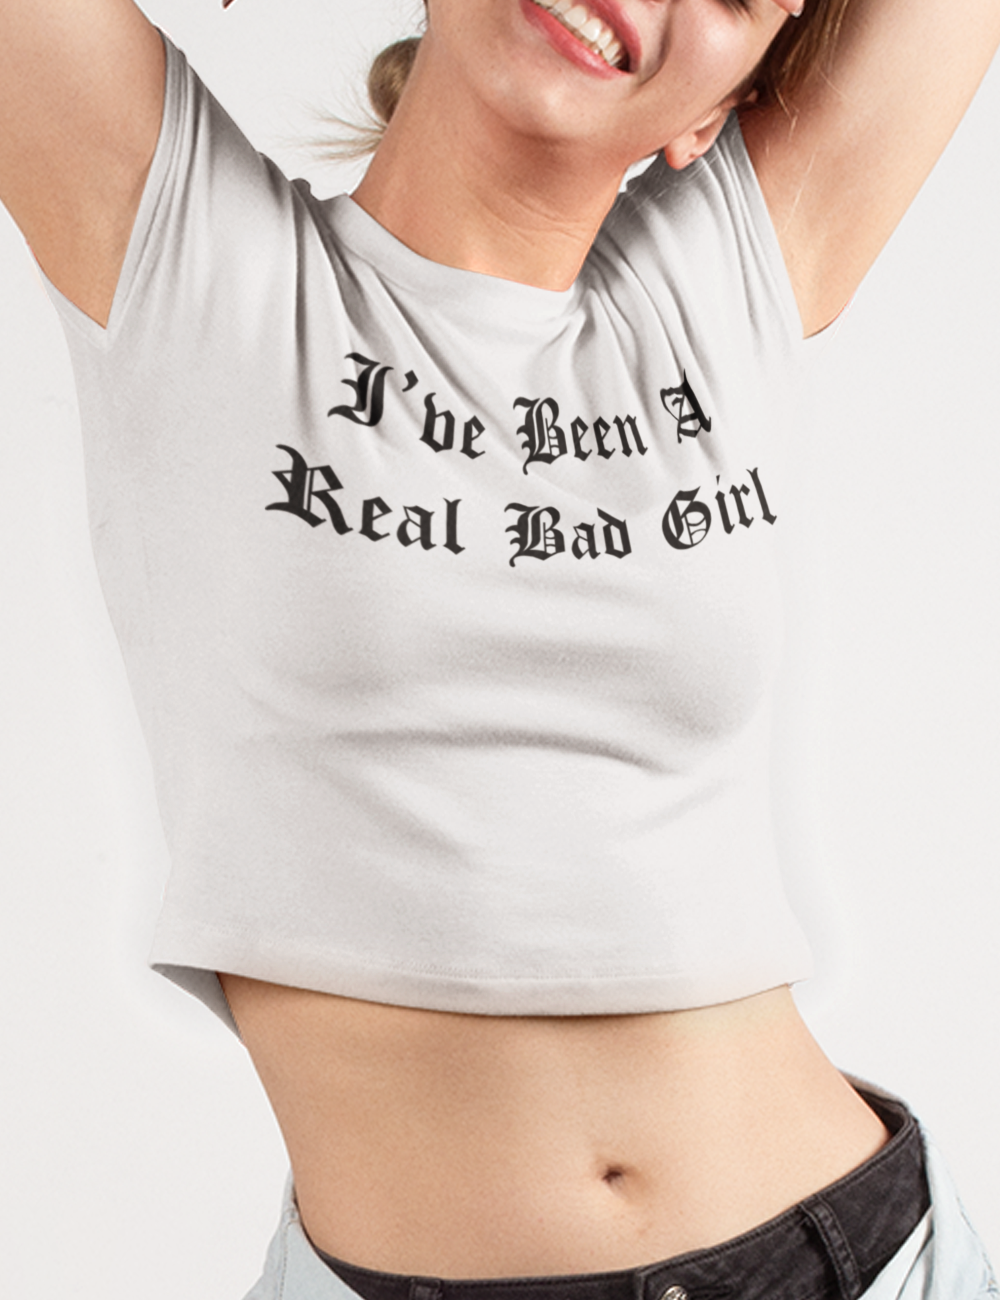 I've Been A Real Bad Girl Women's Fitted Crop Top T-Shirt OniTakai